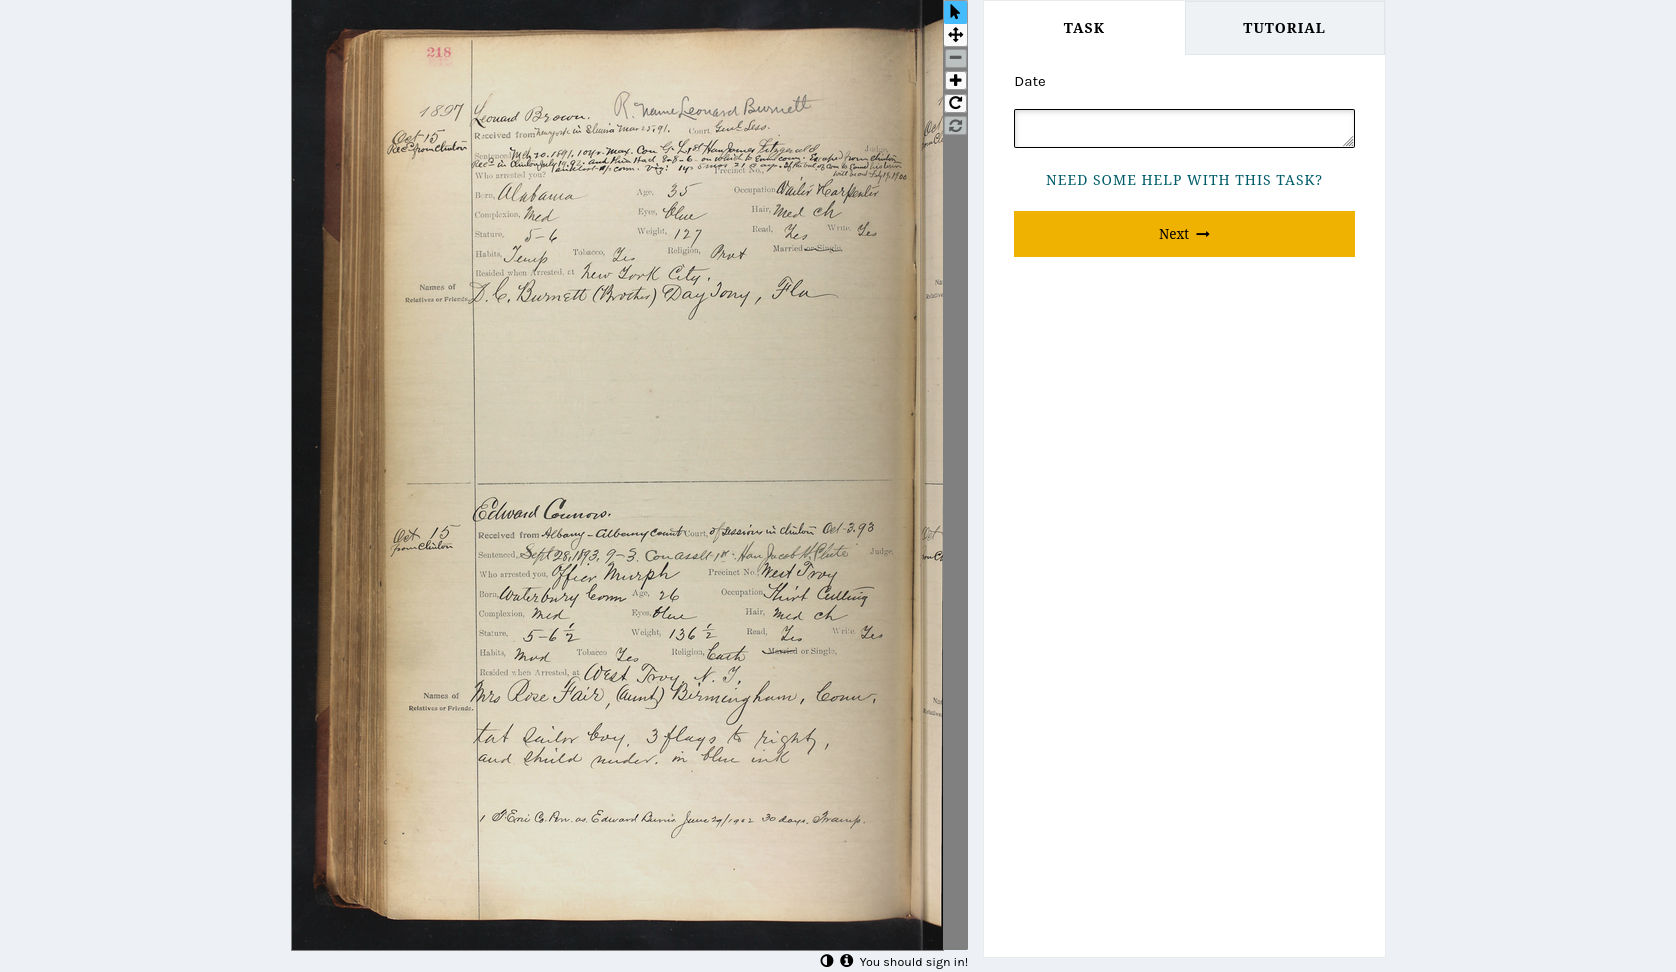 screenshot of a webpage showing an image of an old, (19th century), hand-written log book. next to it is a text entry field prompting the user to enter a date from the image